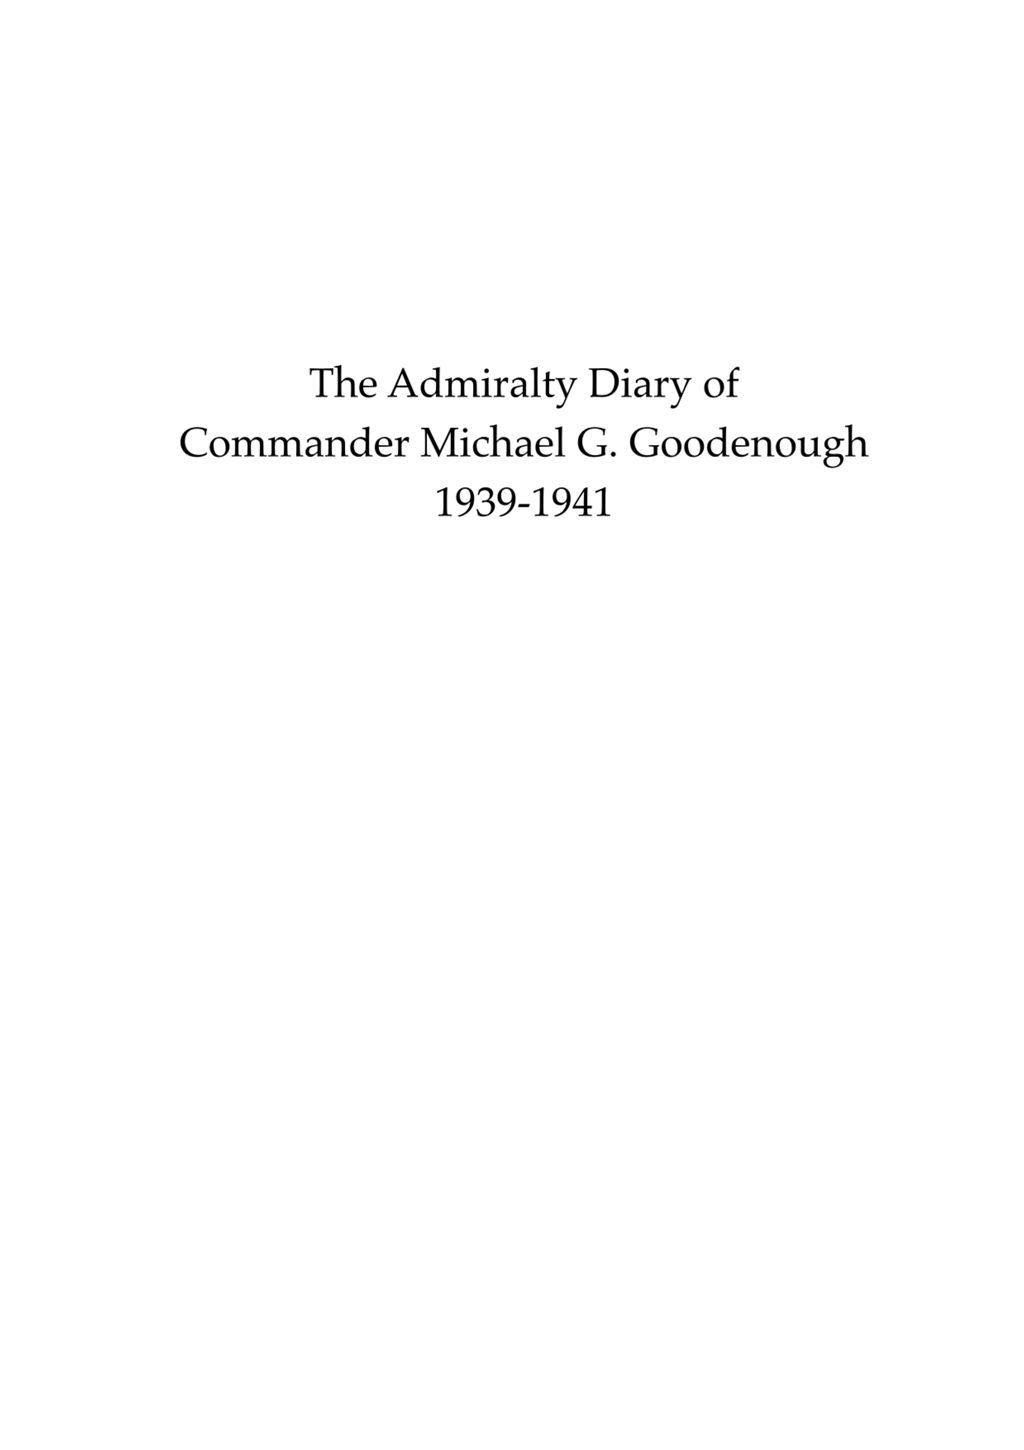 Miniature of Admiralty diary of Commander Michael G. Goodenough, 1939-1941